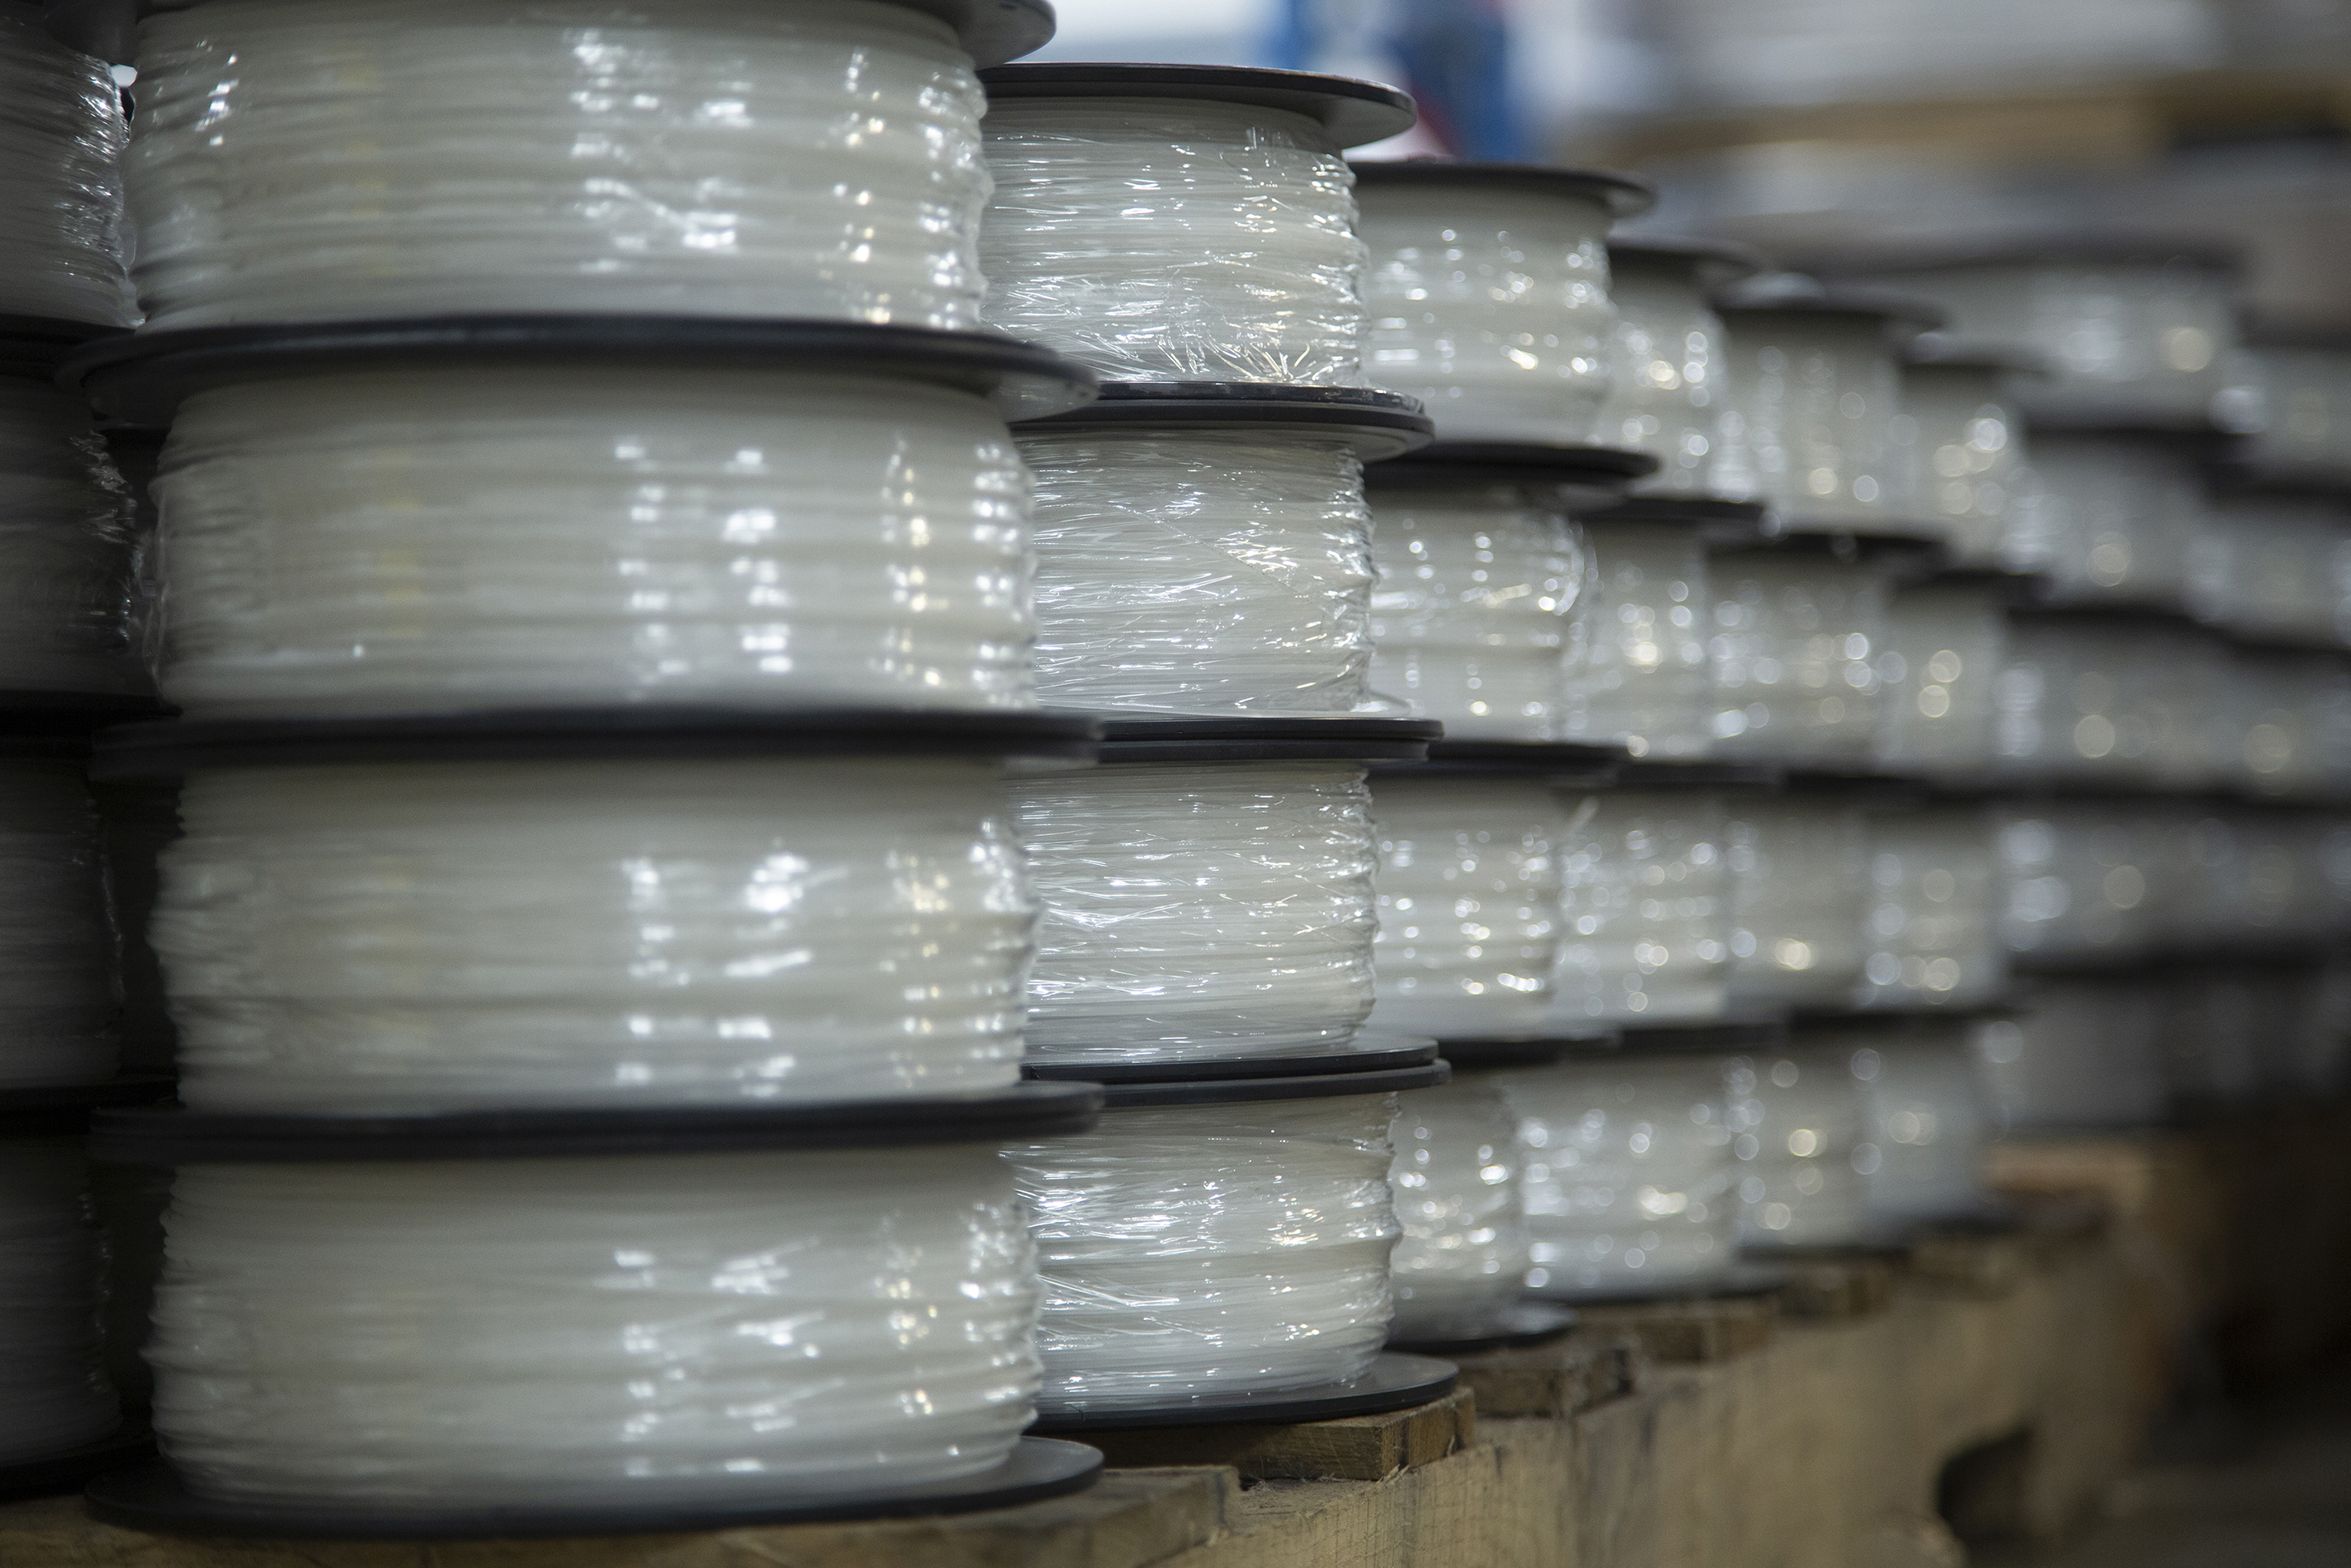 Pallets of Jabil Engineered Material in filament form are prepared for shipment to Jabil customers and distribution partners. Photo via Jabil.